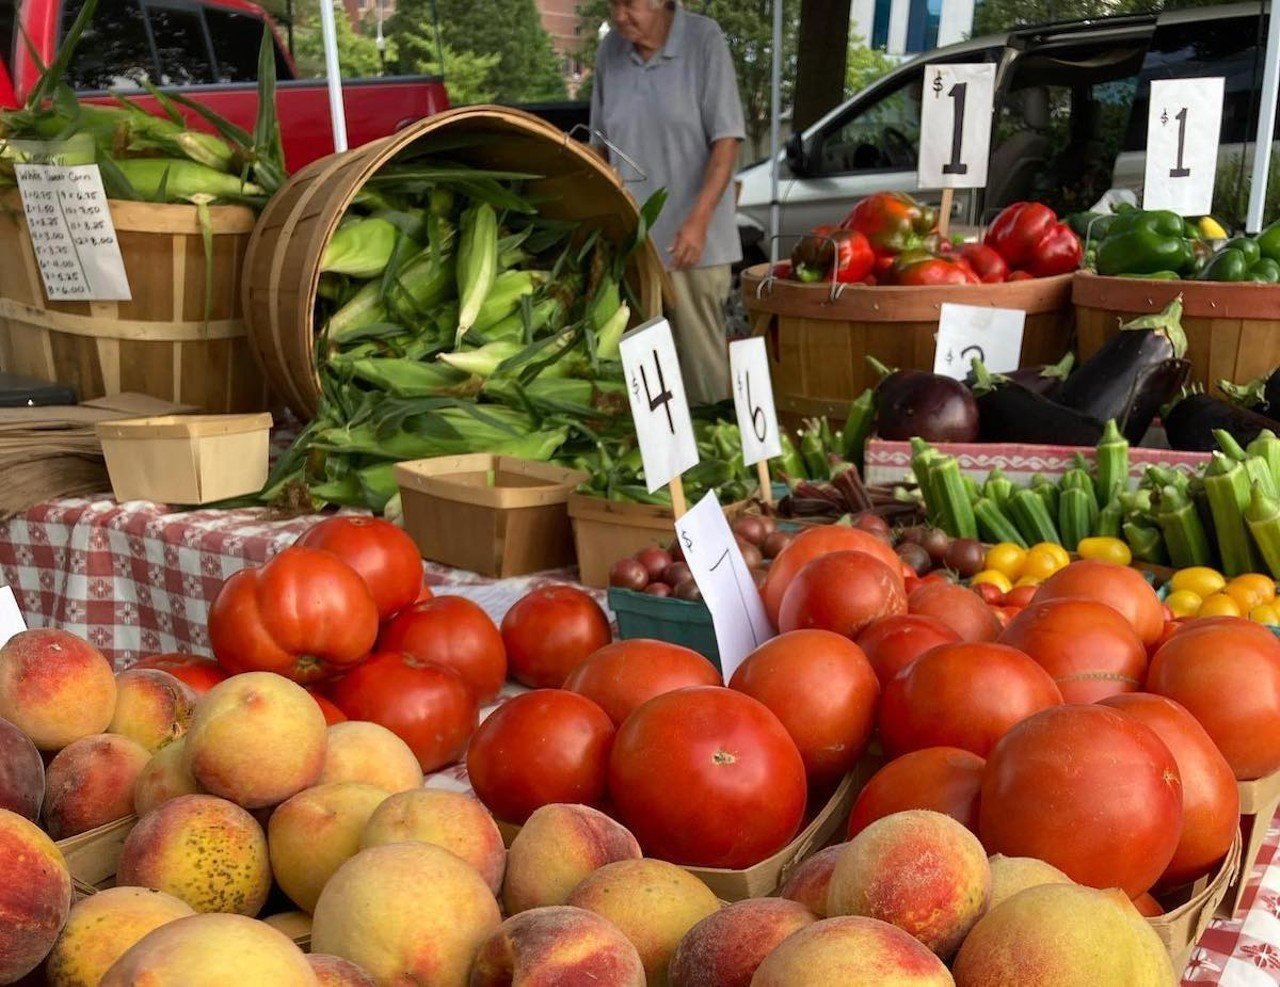 Covington Farmers Market
Third Street at Court Street, Covington
Saturdays 9 a.m.-1 p.m.
Covington Farmers Market has over a dozen vendors and operates April through October. It’s a great place to stop for seasonal produce, meat and fish, eggs, fresh bread and much more.